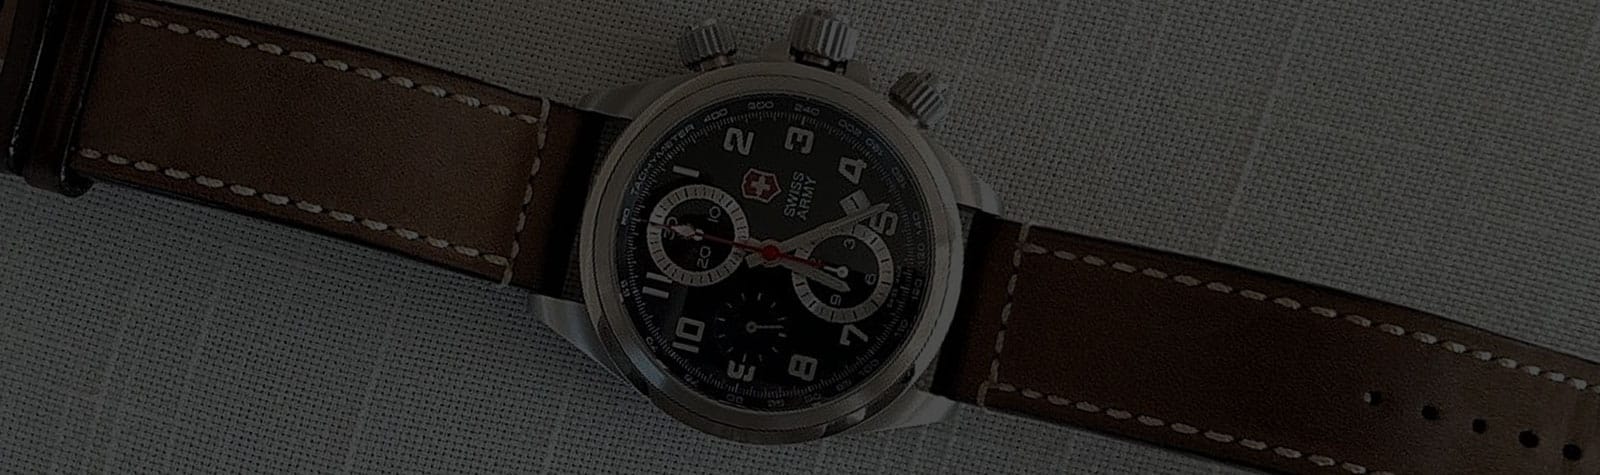 MEET THE WATCH: Victorinox Swiss Army ChronoPro Limited Edition from 2004